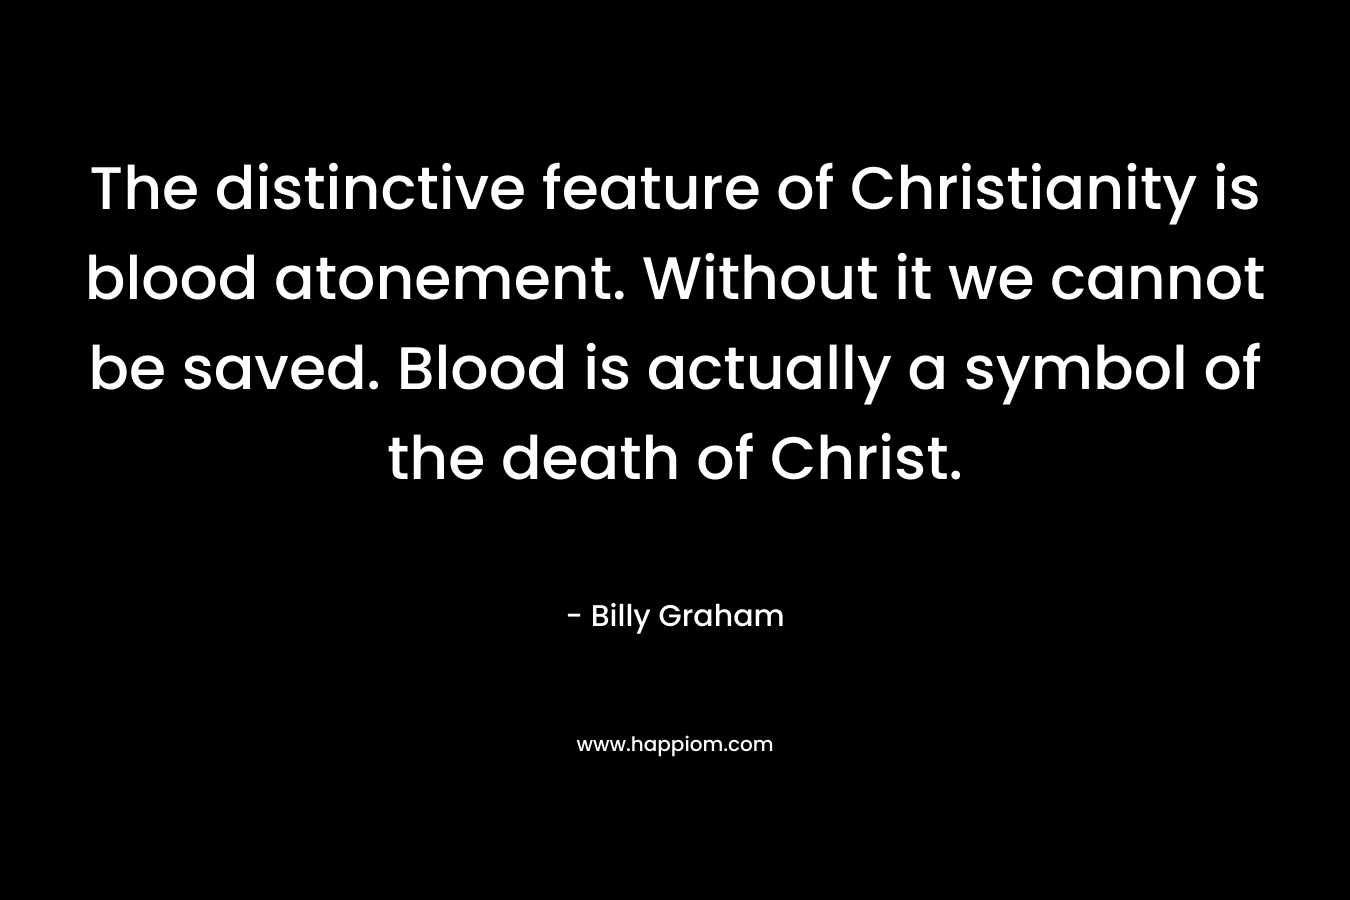 The distinctive feature of Christianity is blood atonement. Without it we cannot be saved. Blood is actually a symbol of the death of Christ.